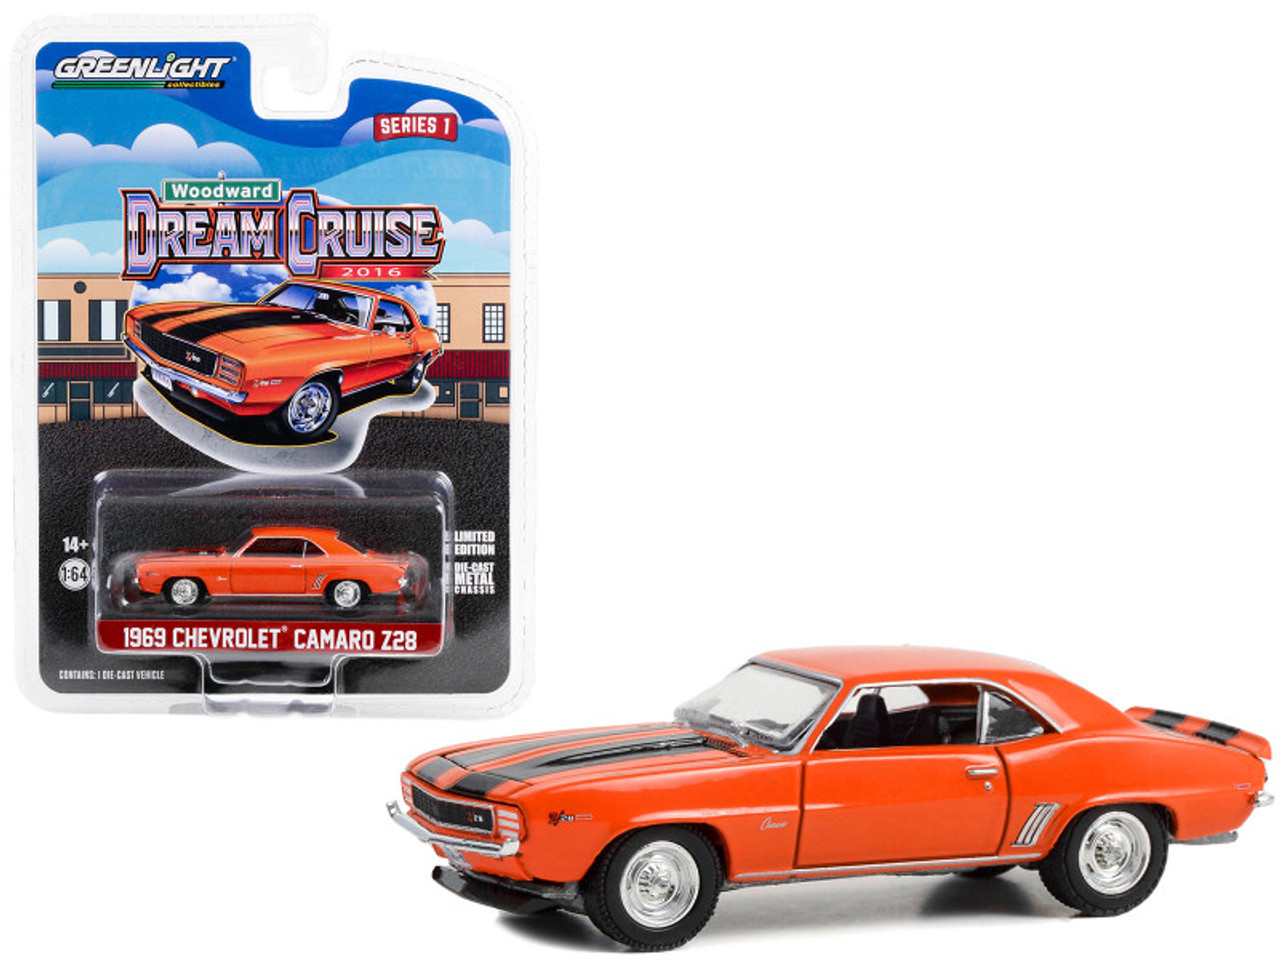 1969 Chevrolet Camaro Z/28 Orange with Black Stripes "22nd Annual Woodward Dream Cruise Featured Heritage Vehicle" (2016) "Woodward Dream Cruise" Series 1 1/64 Diecast Model Car by Greenlight